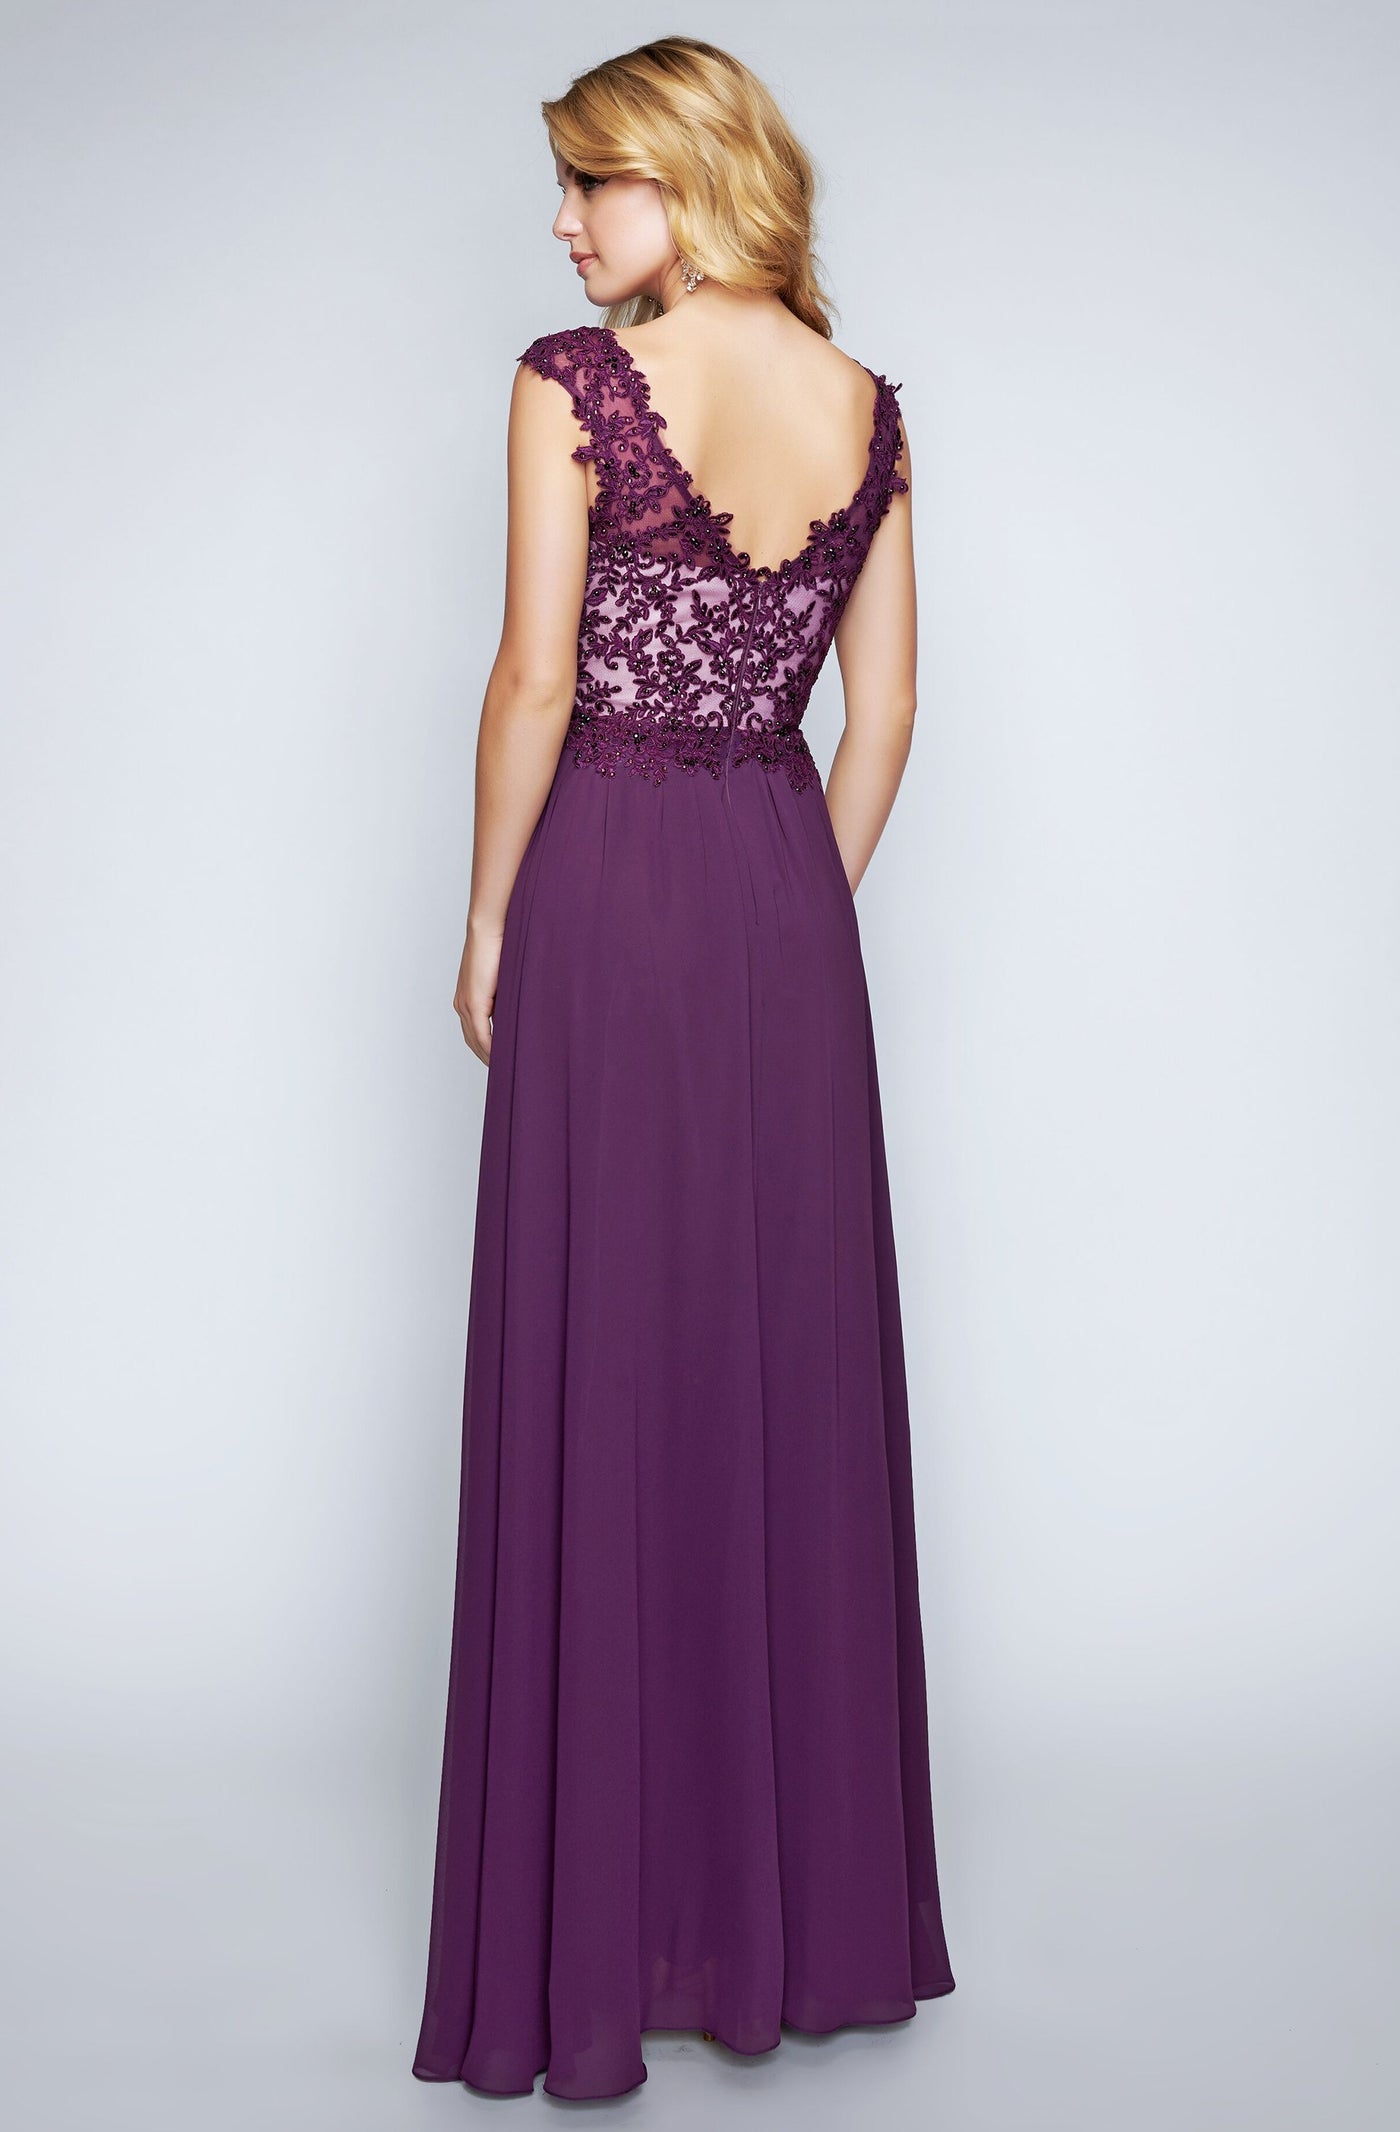 Nina Canacci - 1449 Embellished Lace Bodice A Line Gown in Plum